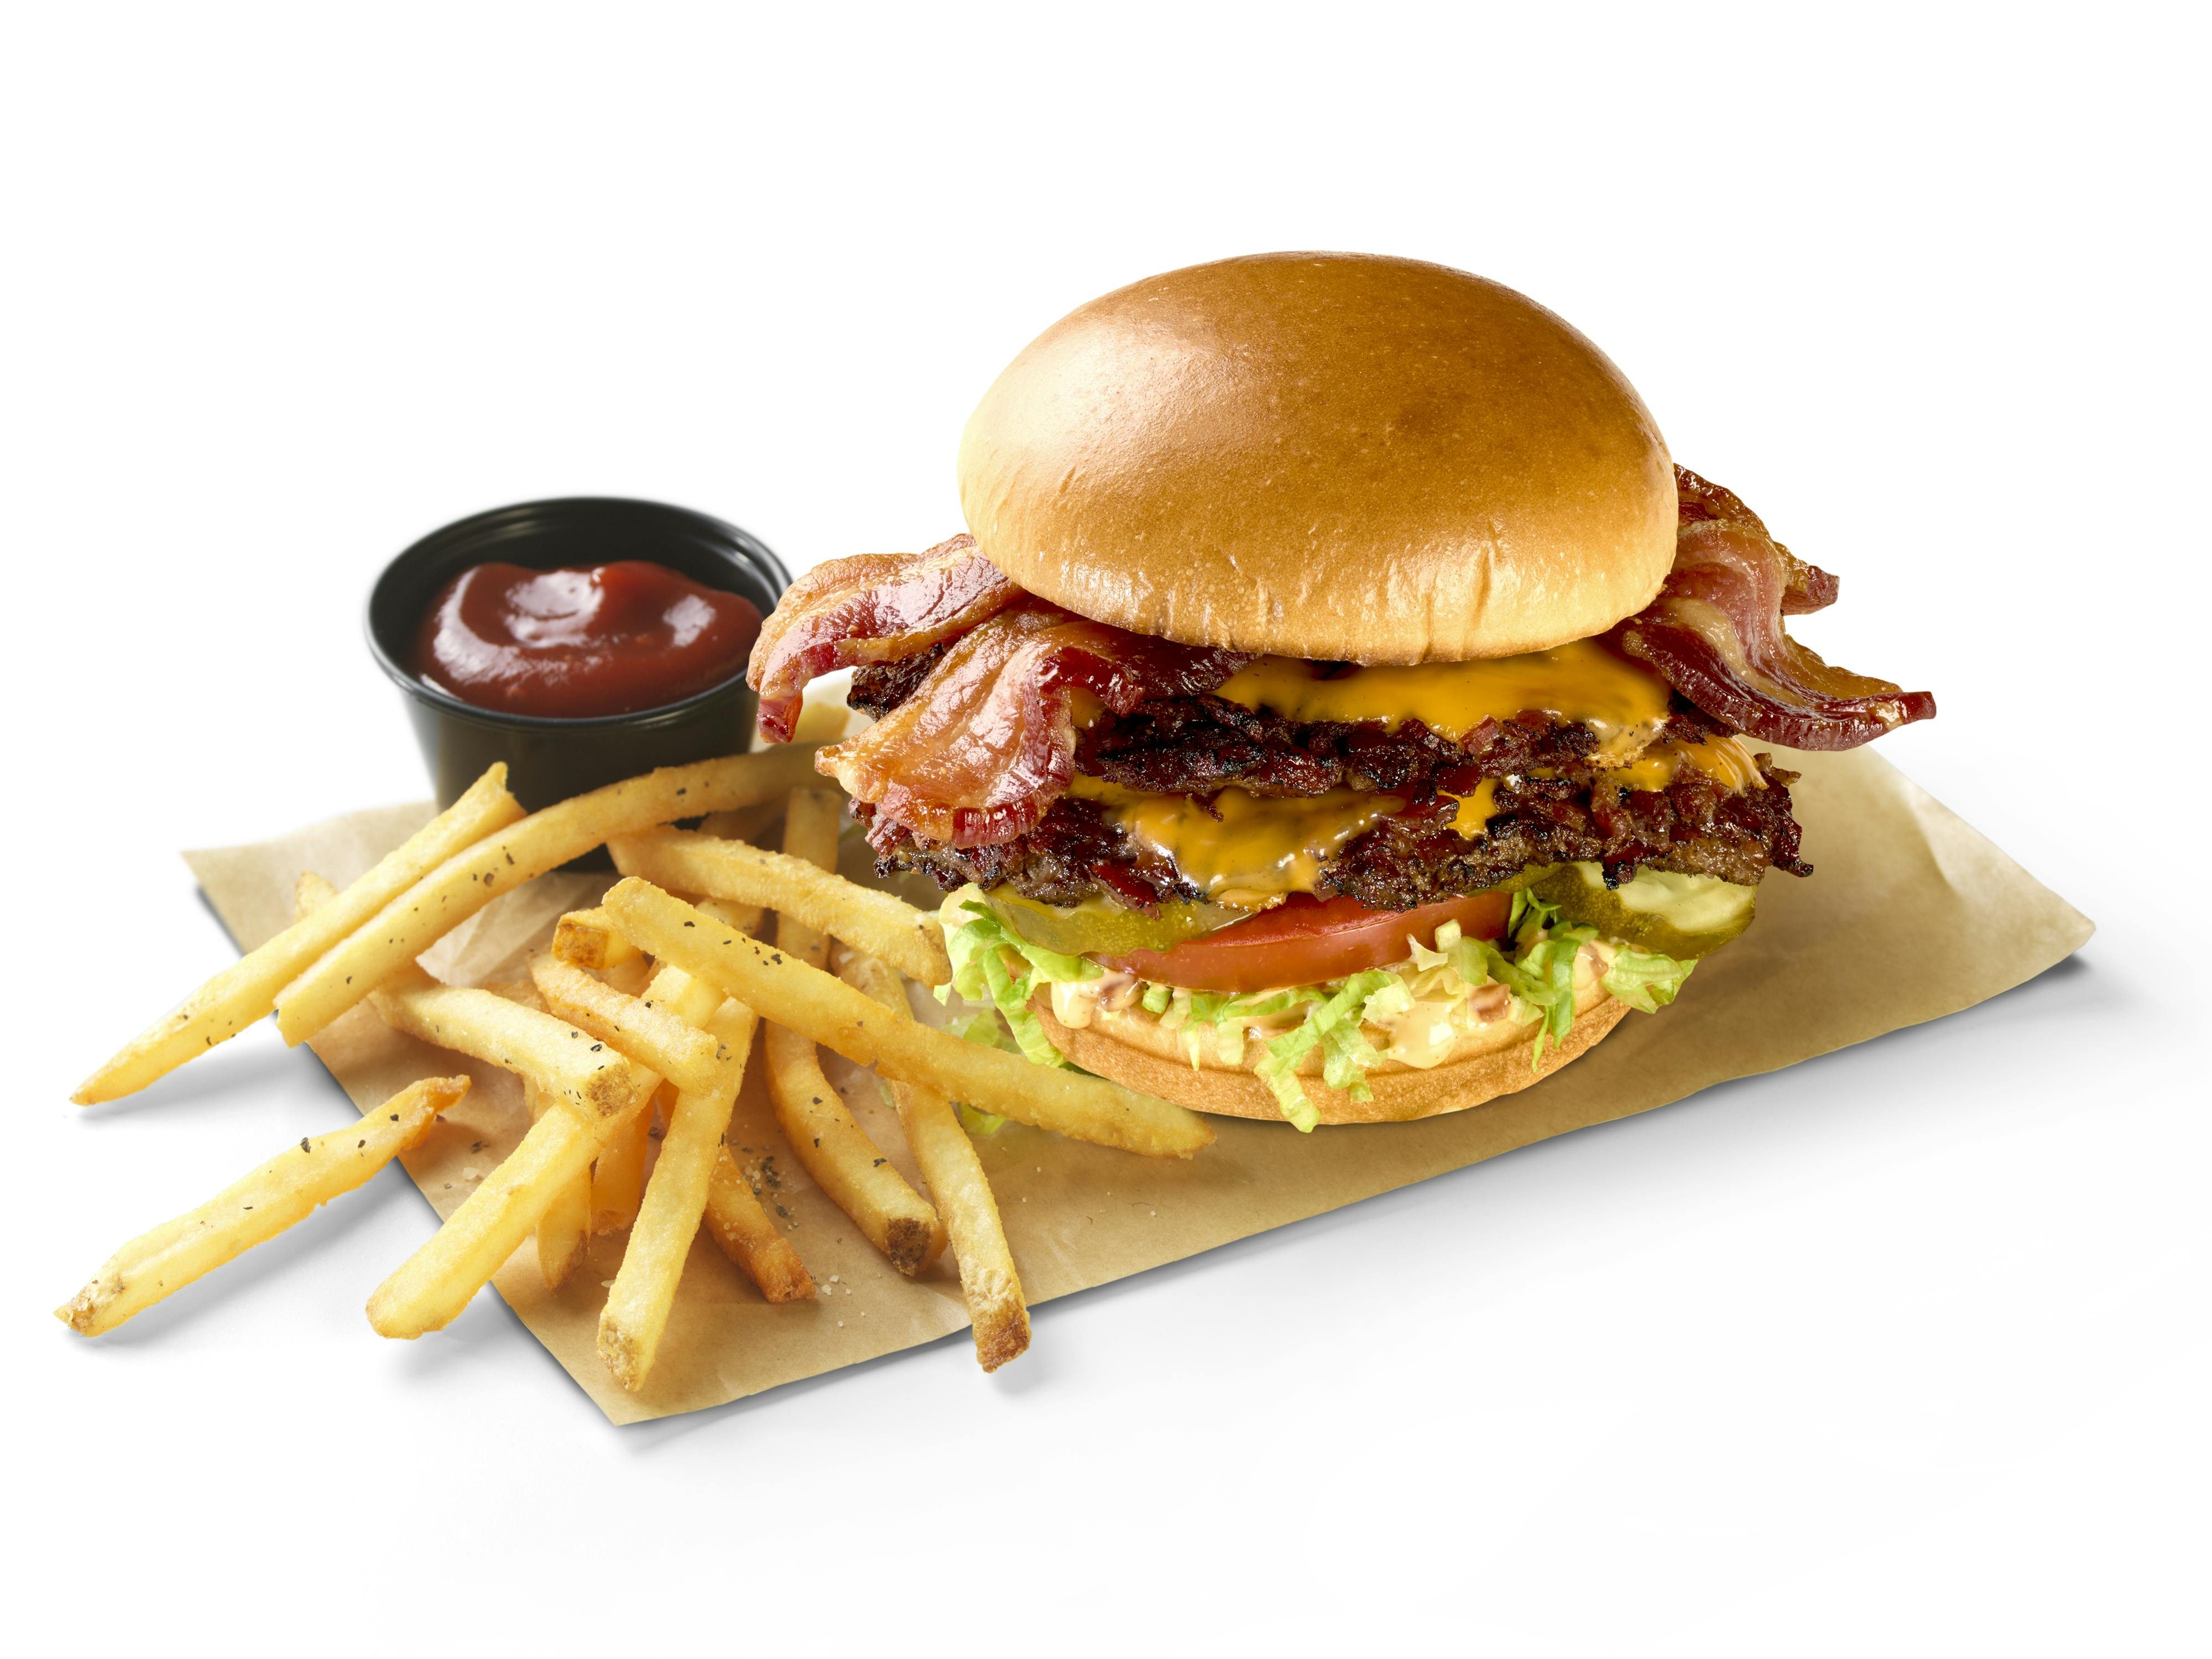 Triple Bacon Cheeseburger from Buffalo Wild Wings - University (414) in Madison, WI